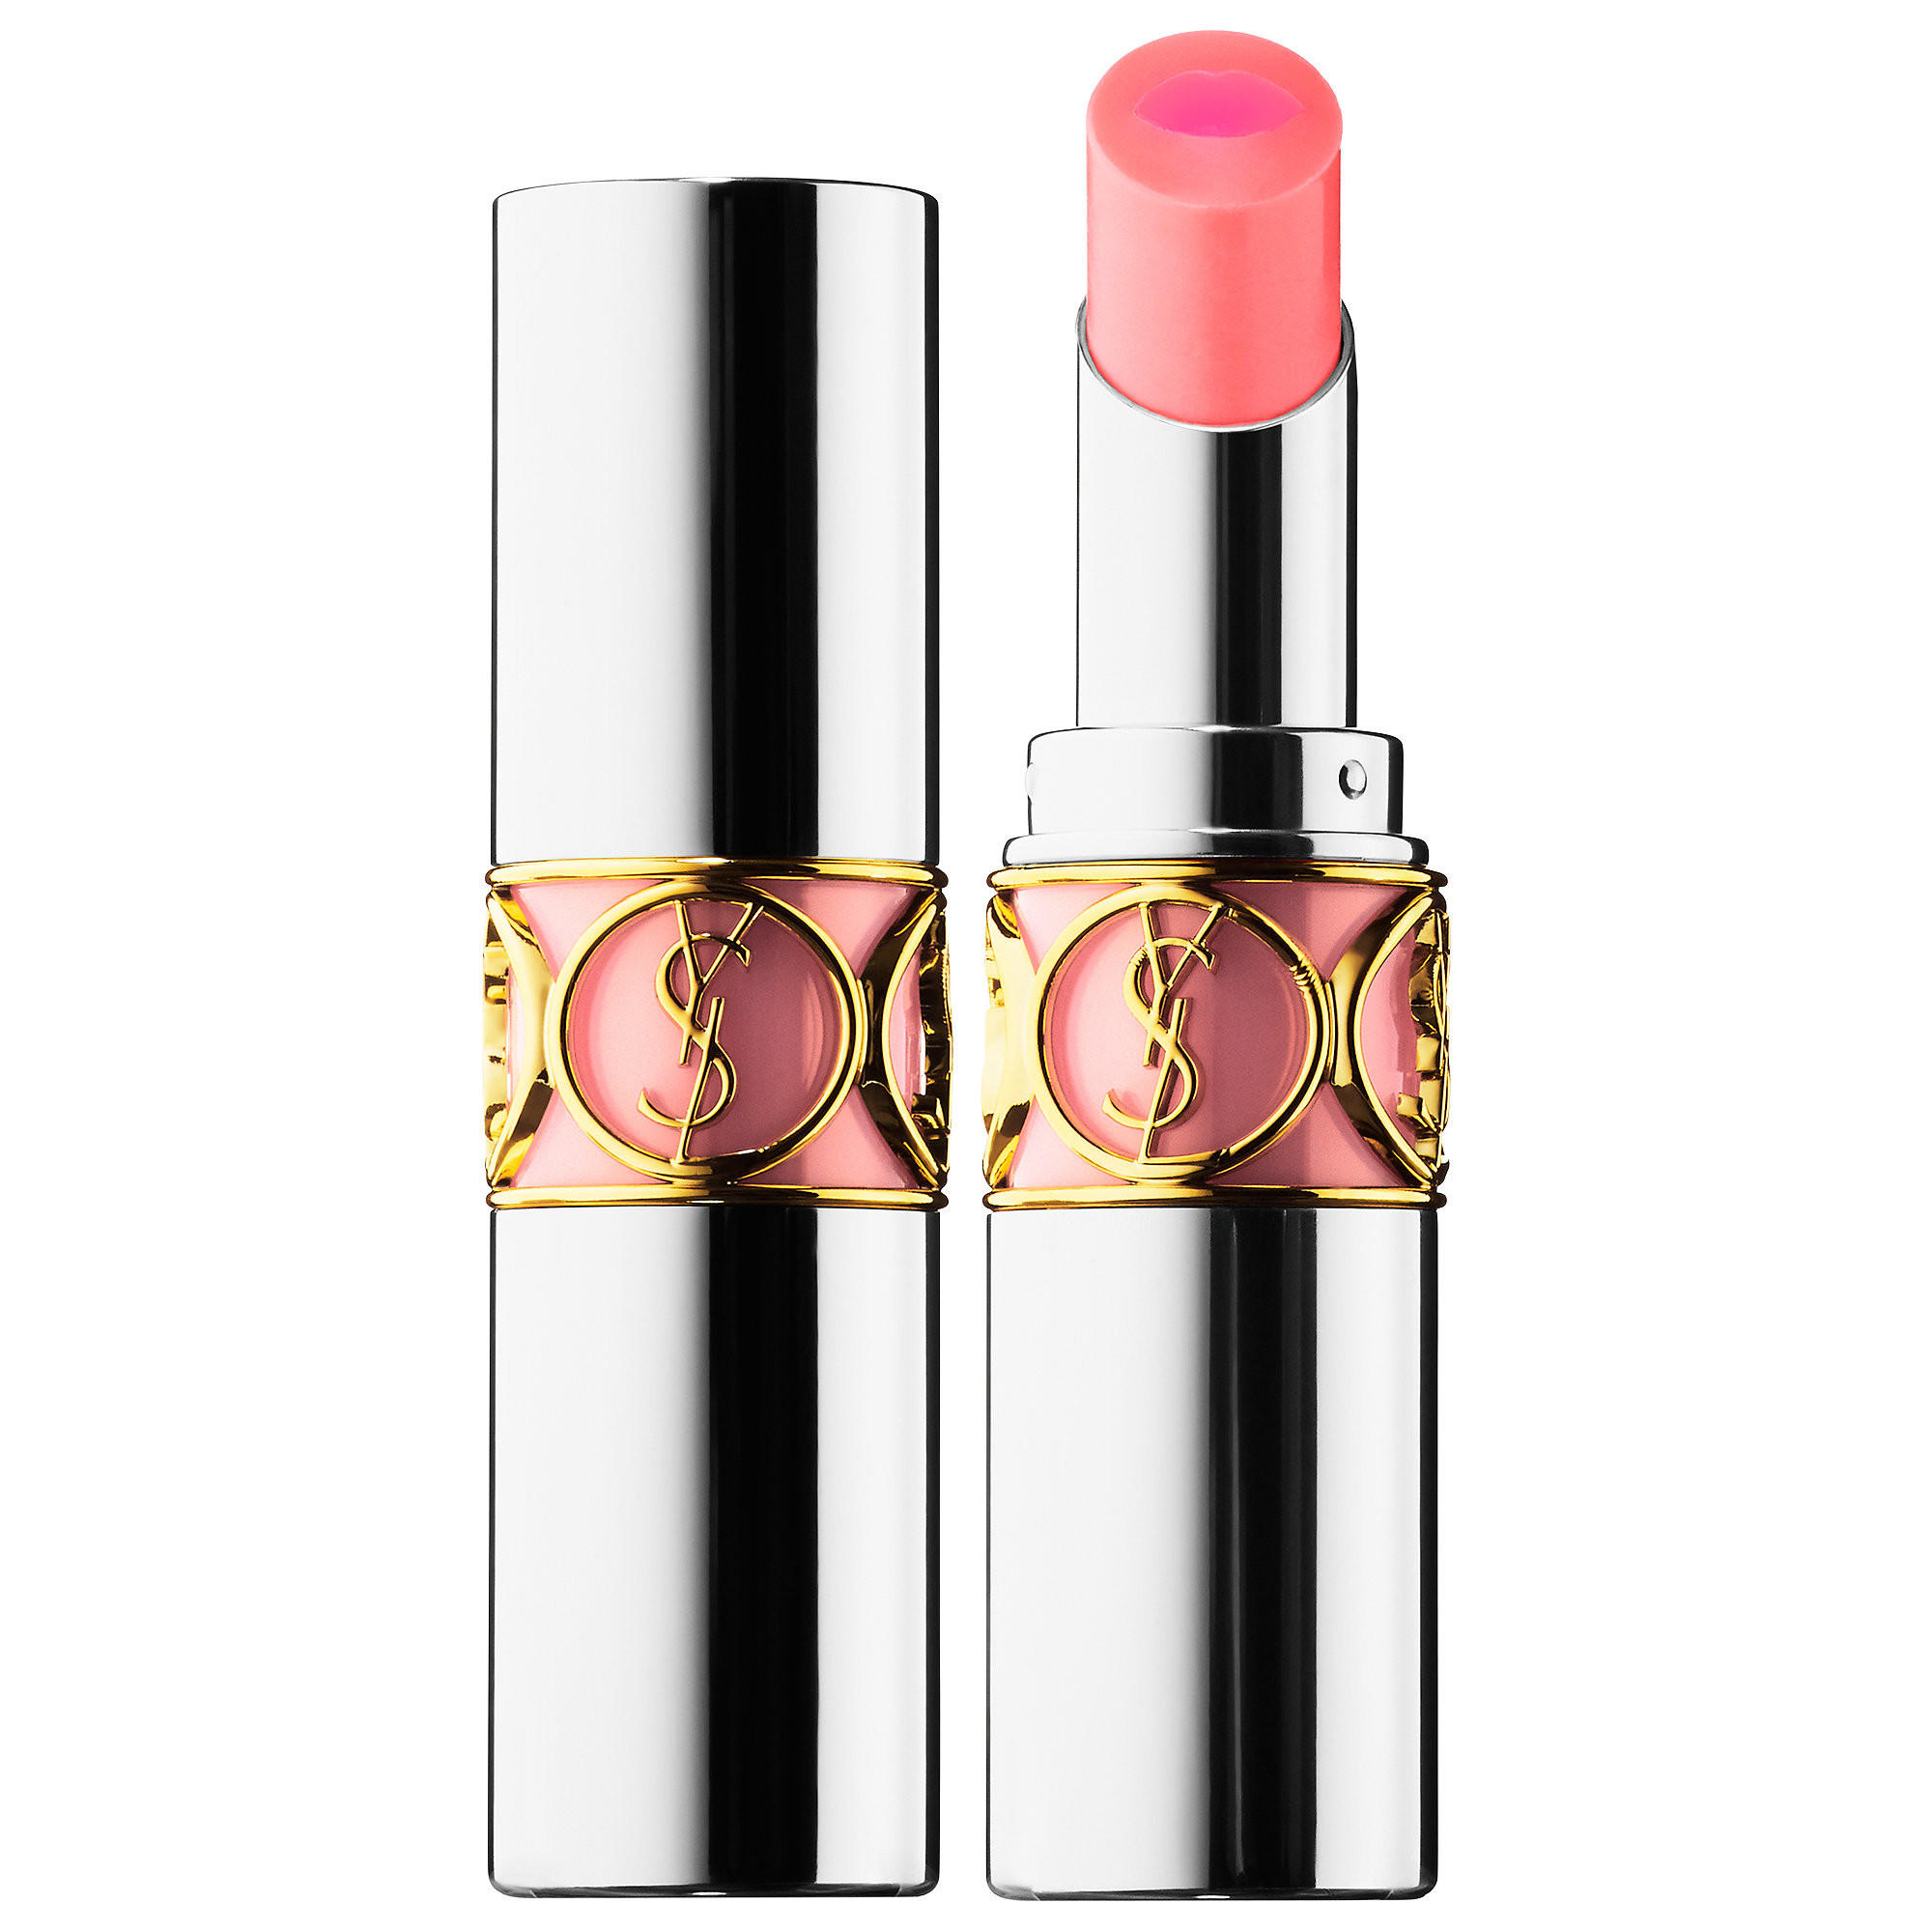 YSL Volupte Tint-In-Balm Call Me Rose 3